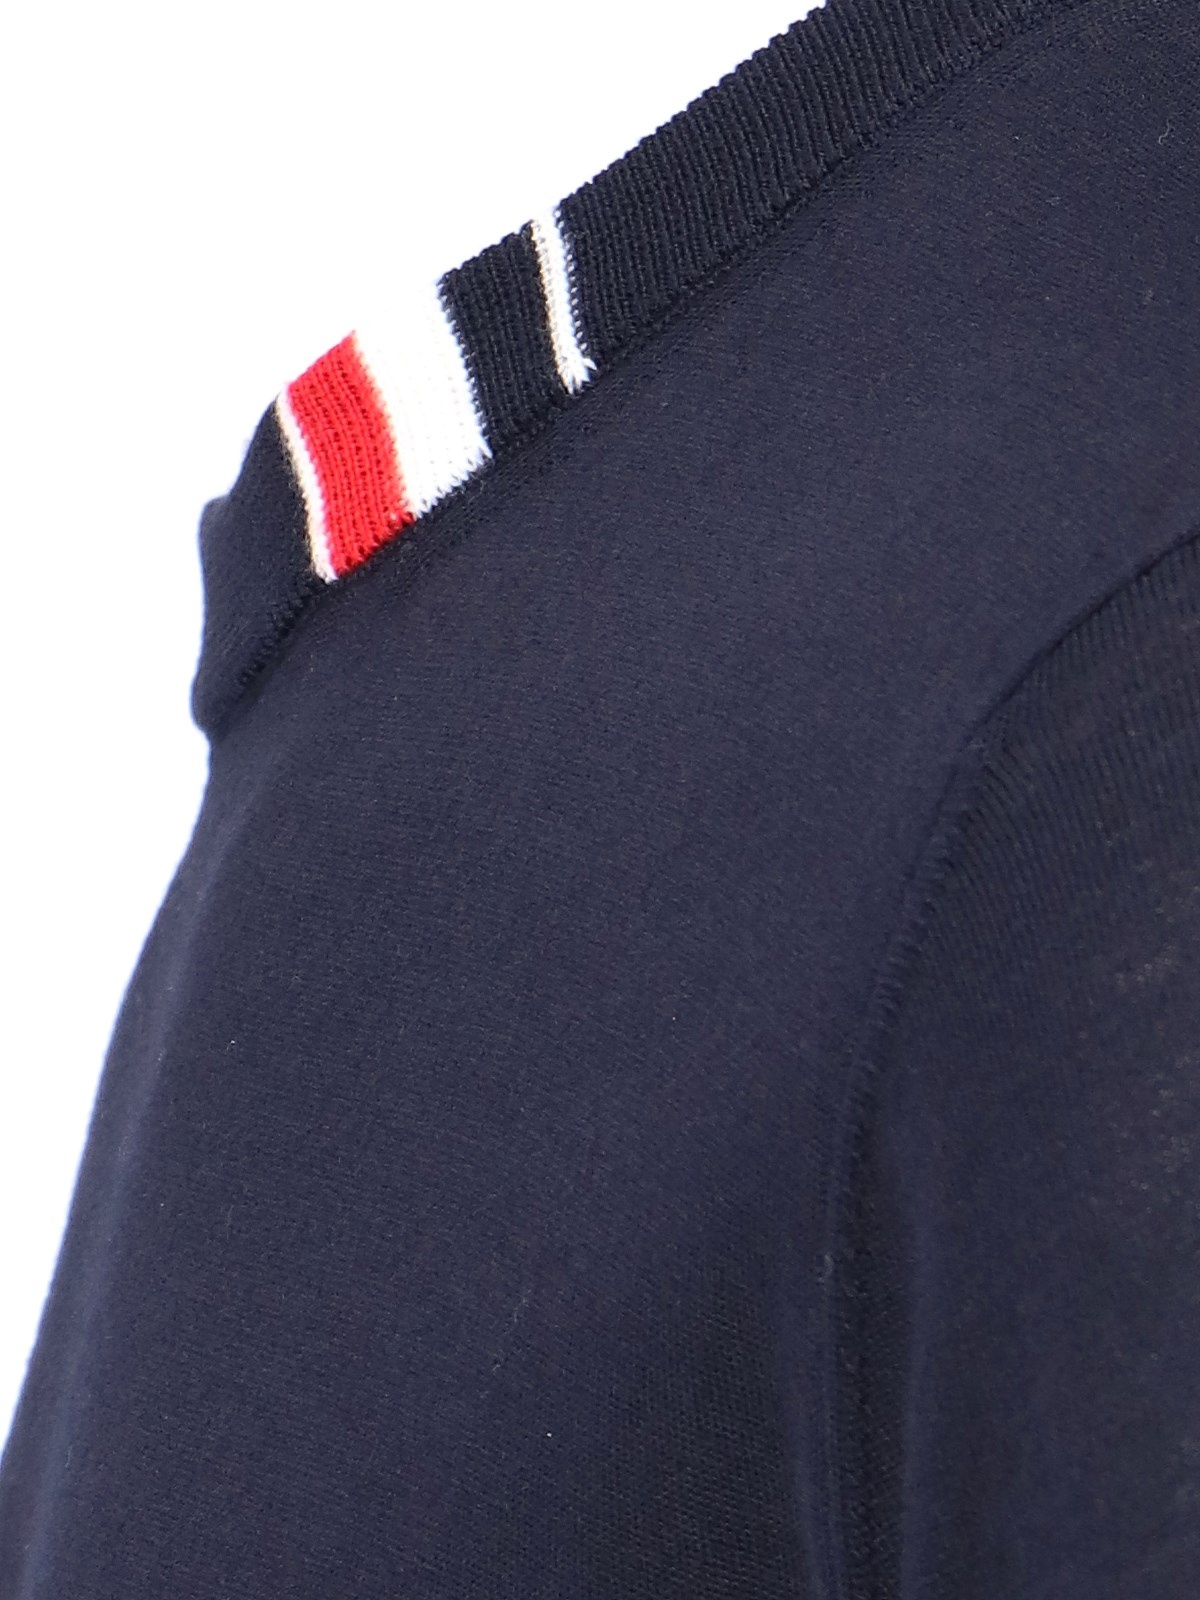 TRICOLOR DETAIL SWEATER - 5